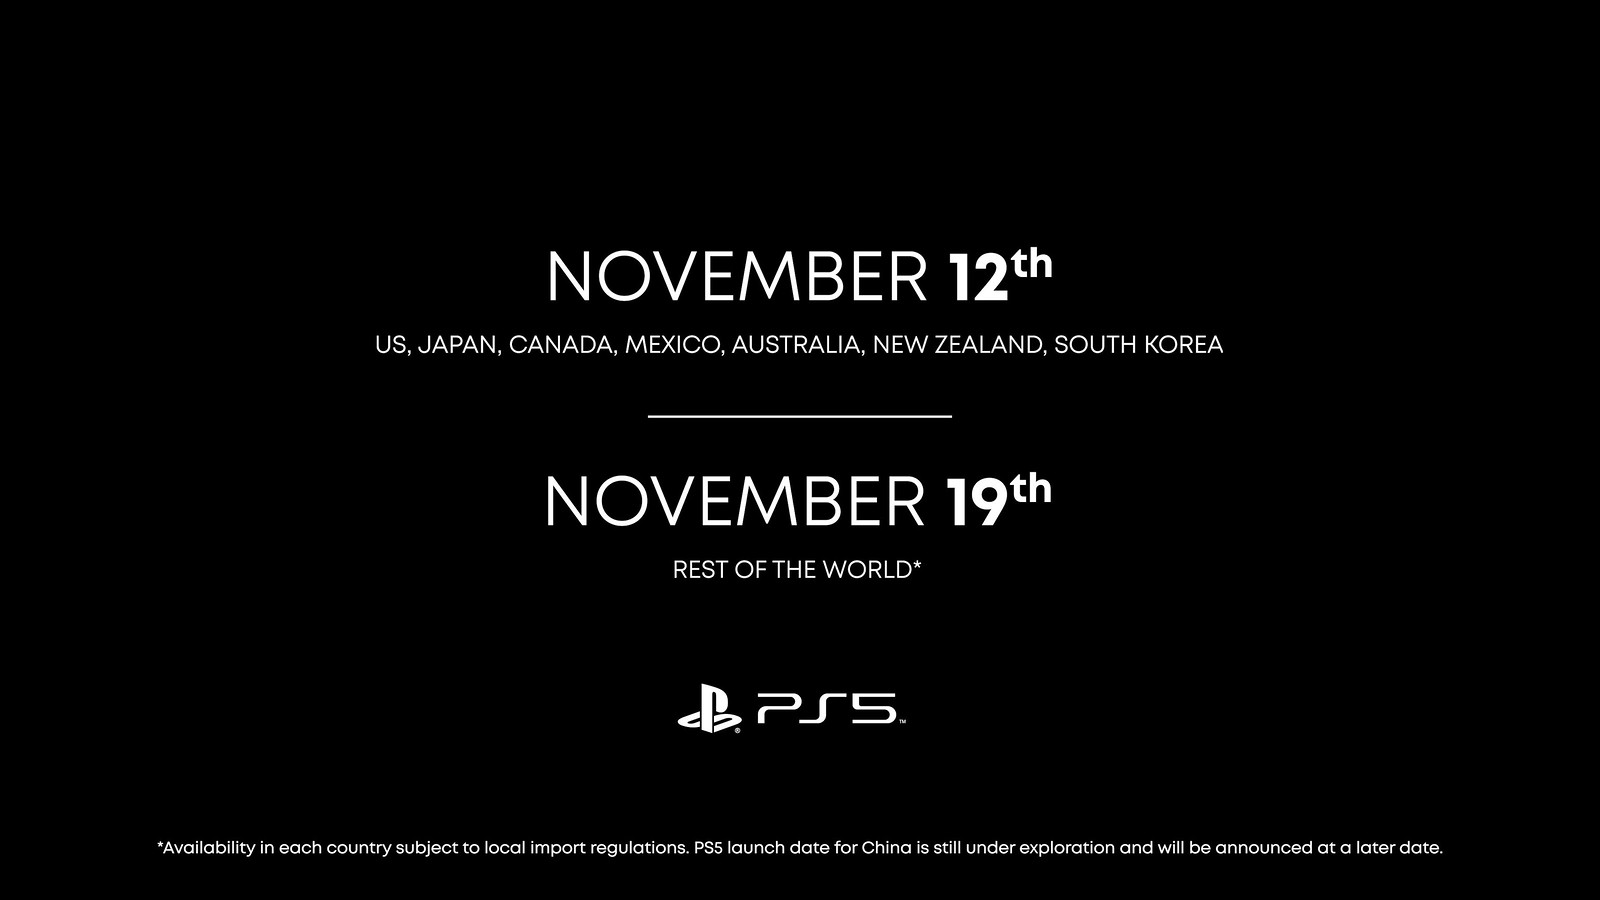 PlayStation 5 launch dates